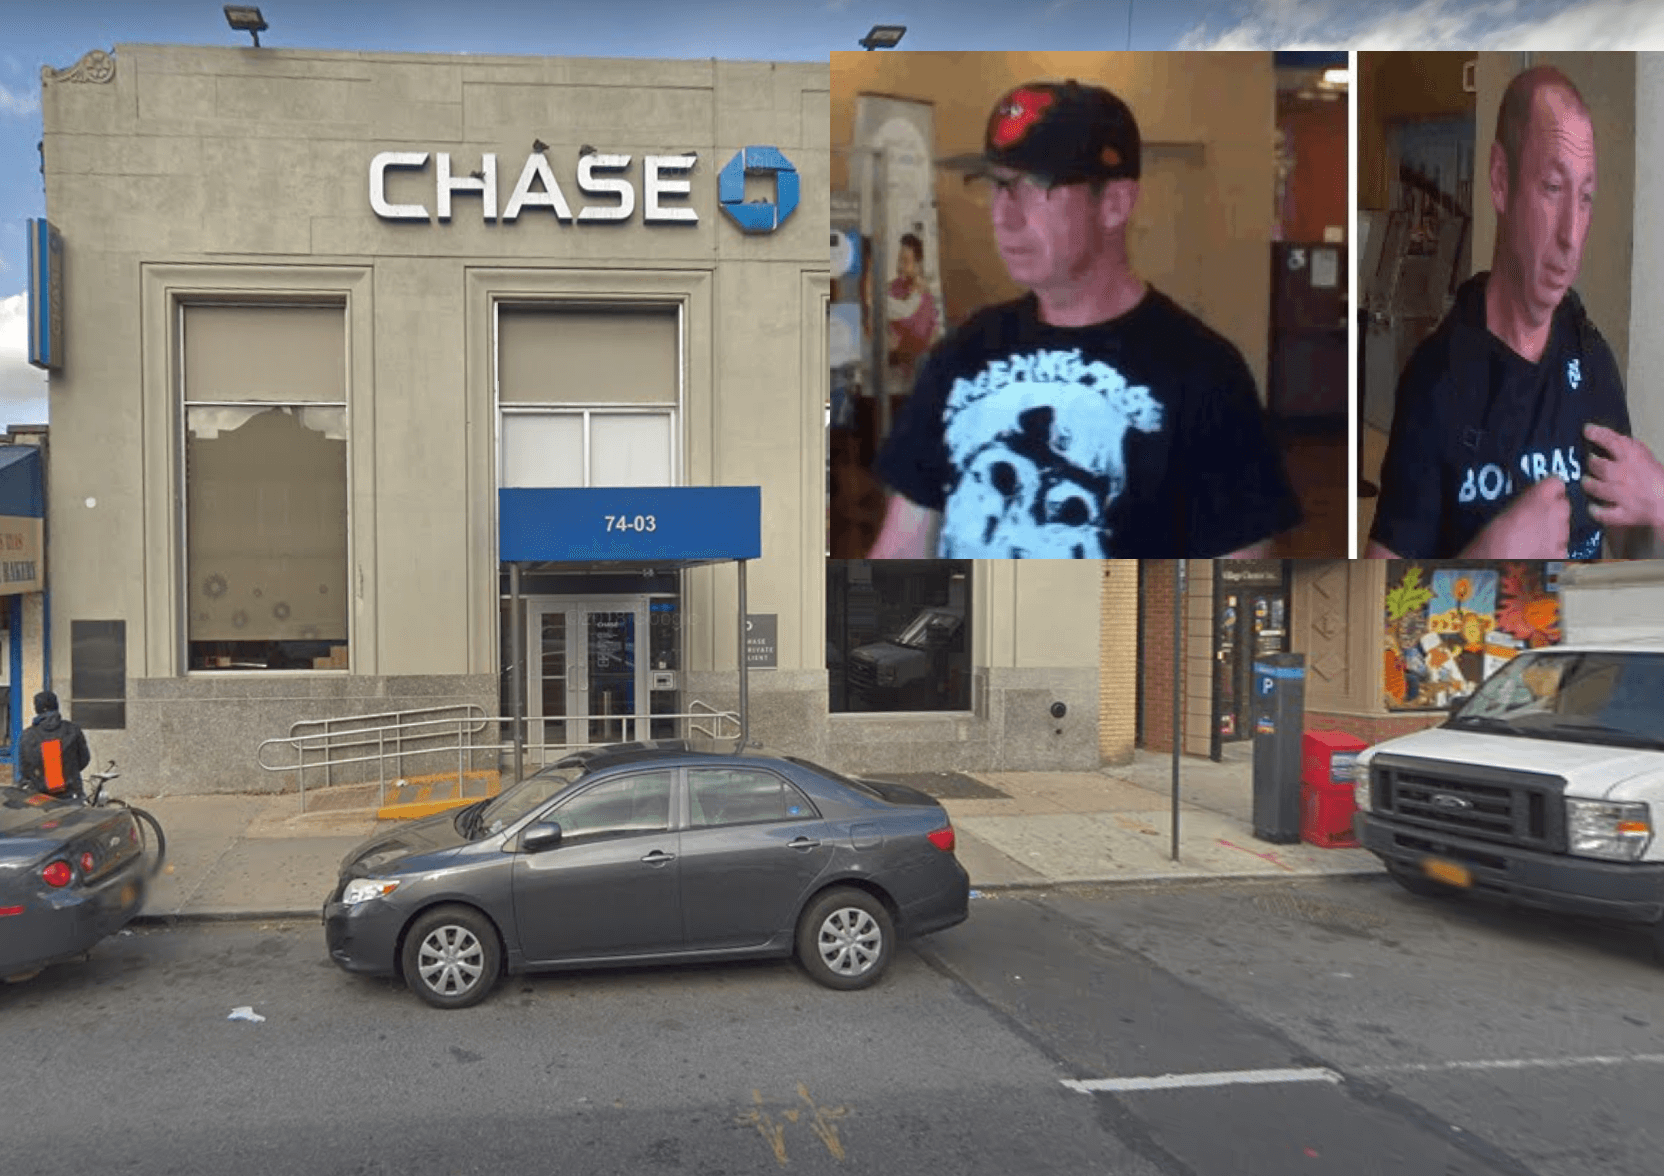 John Grant, a suspect in several recent bank robbery attempts including one at this Chase bank on Metropolitan Avenue in Middle Village, was caught by federal agents on June 18.